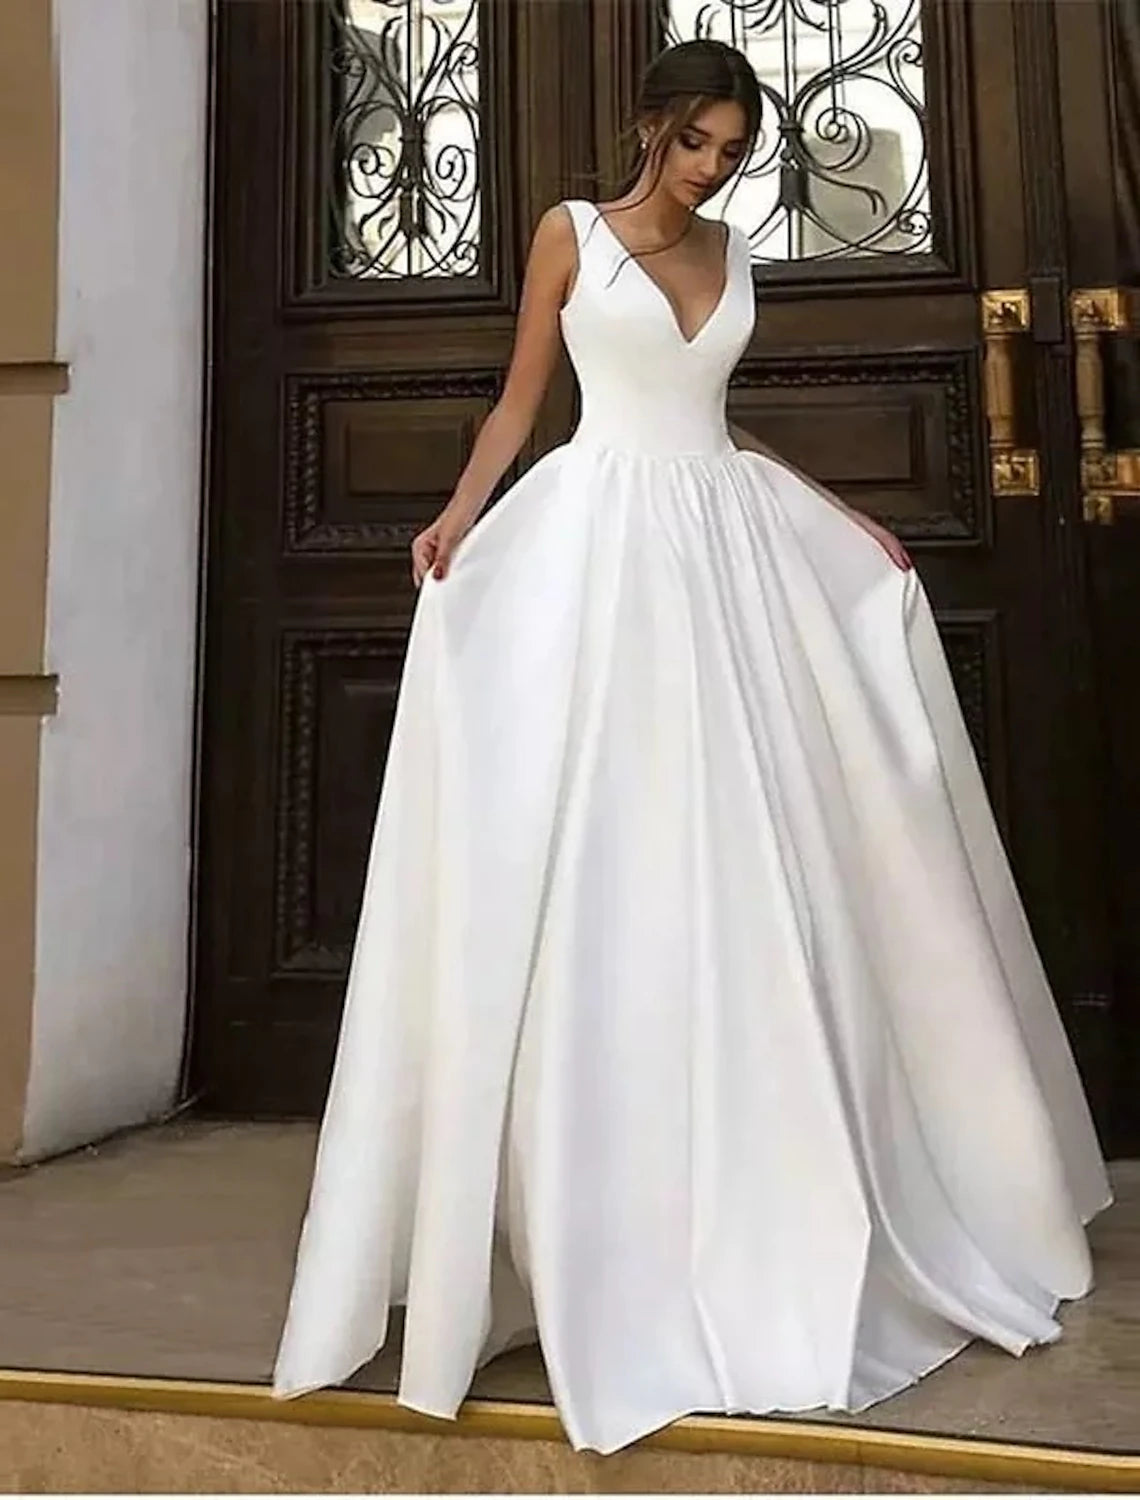 Reception Casual Formal Wedding Dresses A-Line V Neck Sleeveless Floor Length Satin Bridal Gowns With Pleats Solid Color